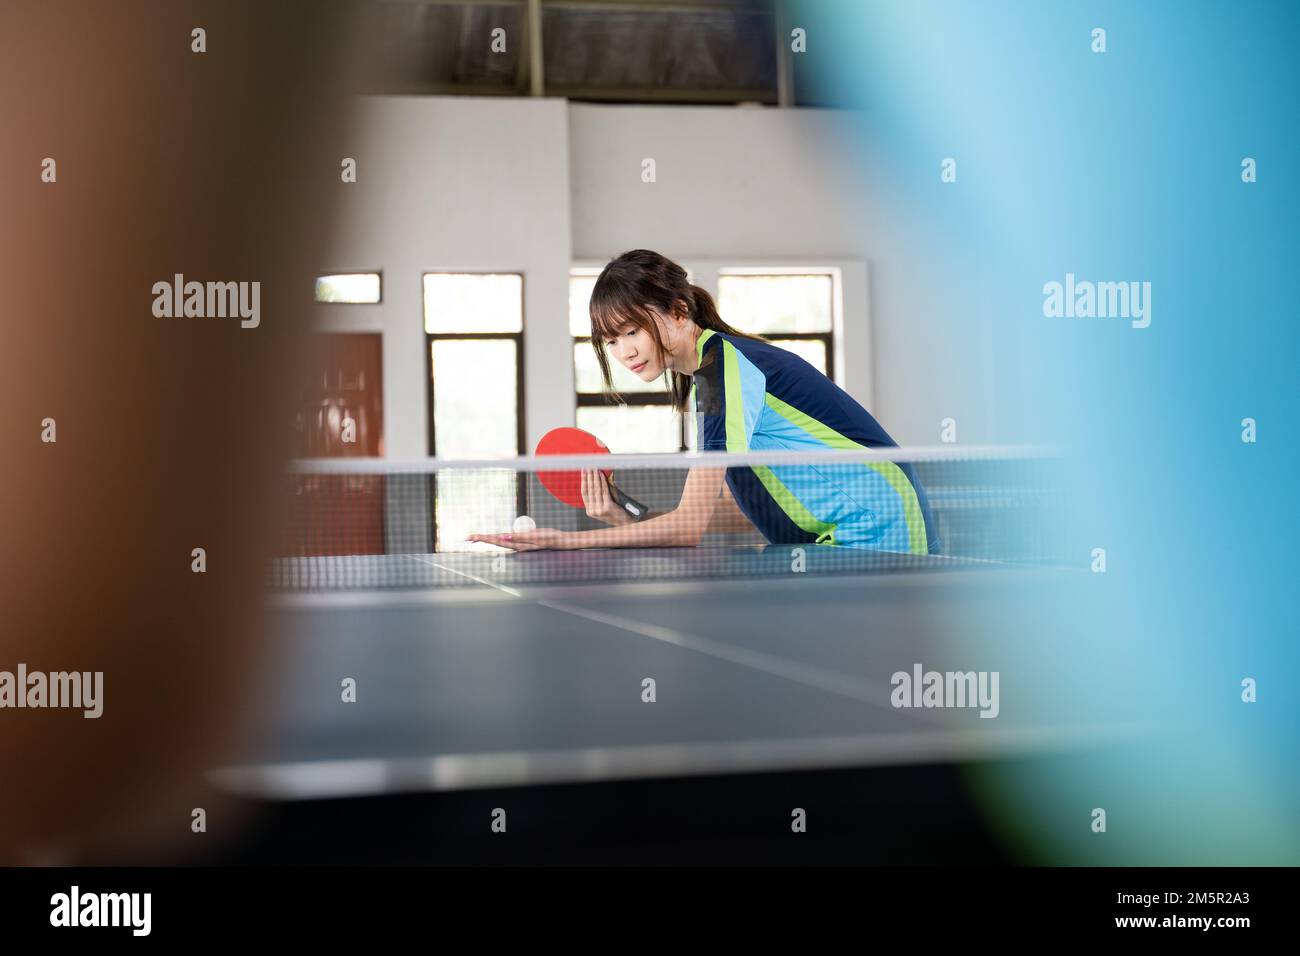 Female athlete holding paddle and ball while serving Stock Photo